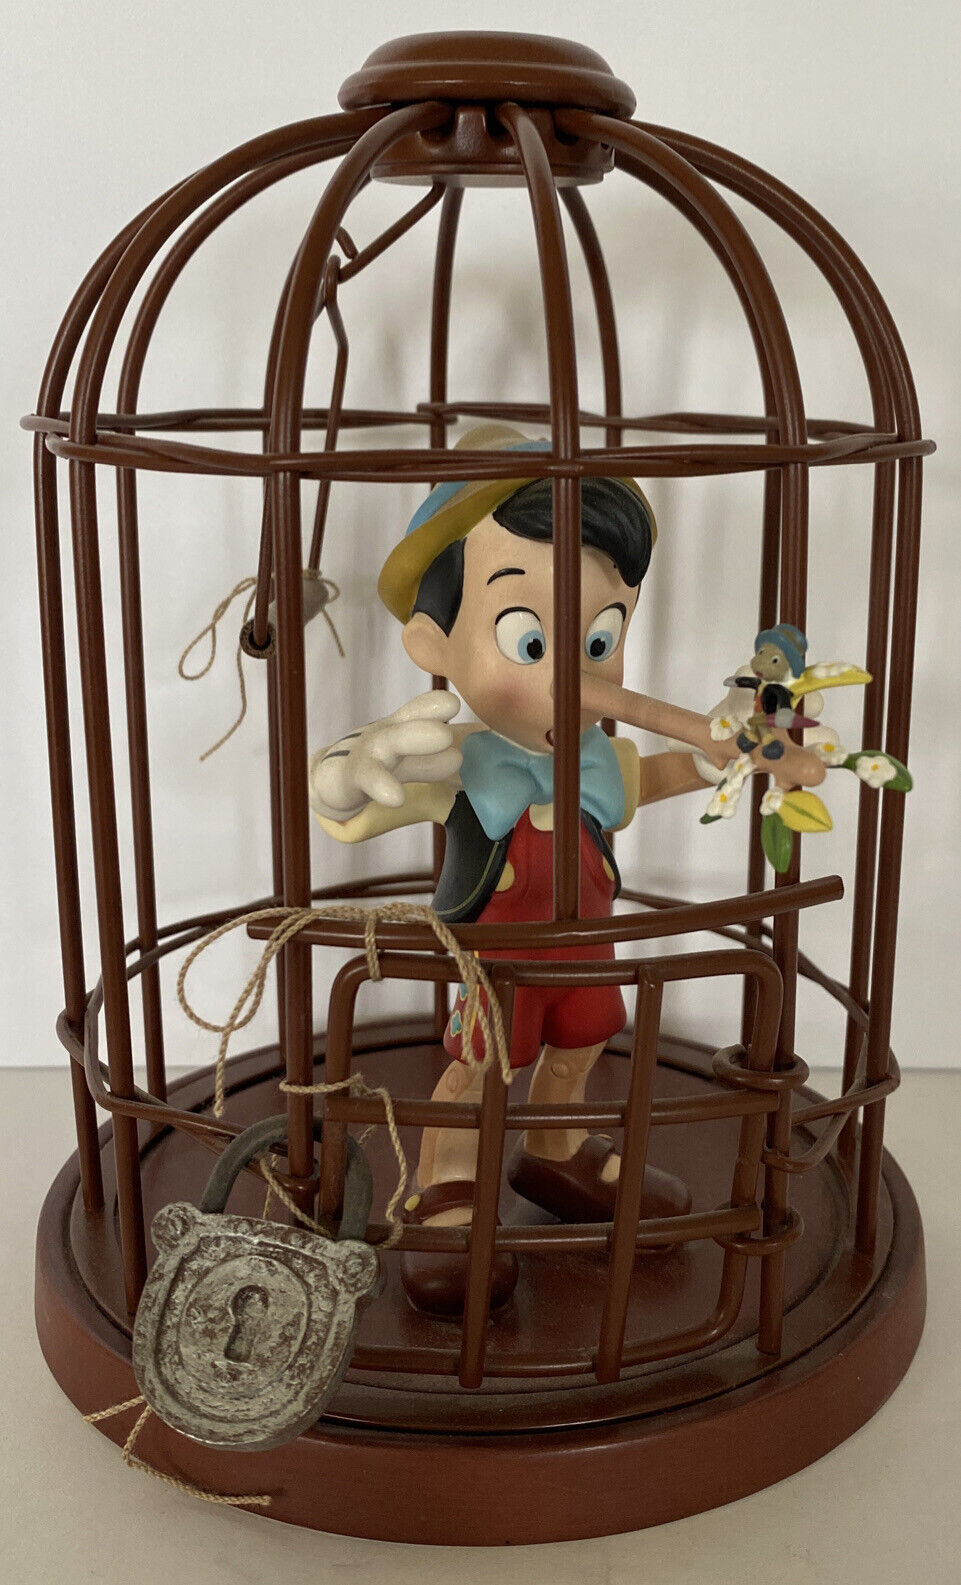 Pinocchio & Jiminy Cricket WDCC I'll Never Lie Again w COA Hard to Find Vintage